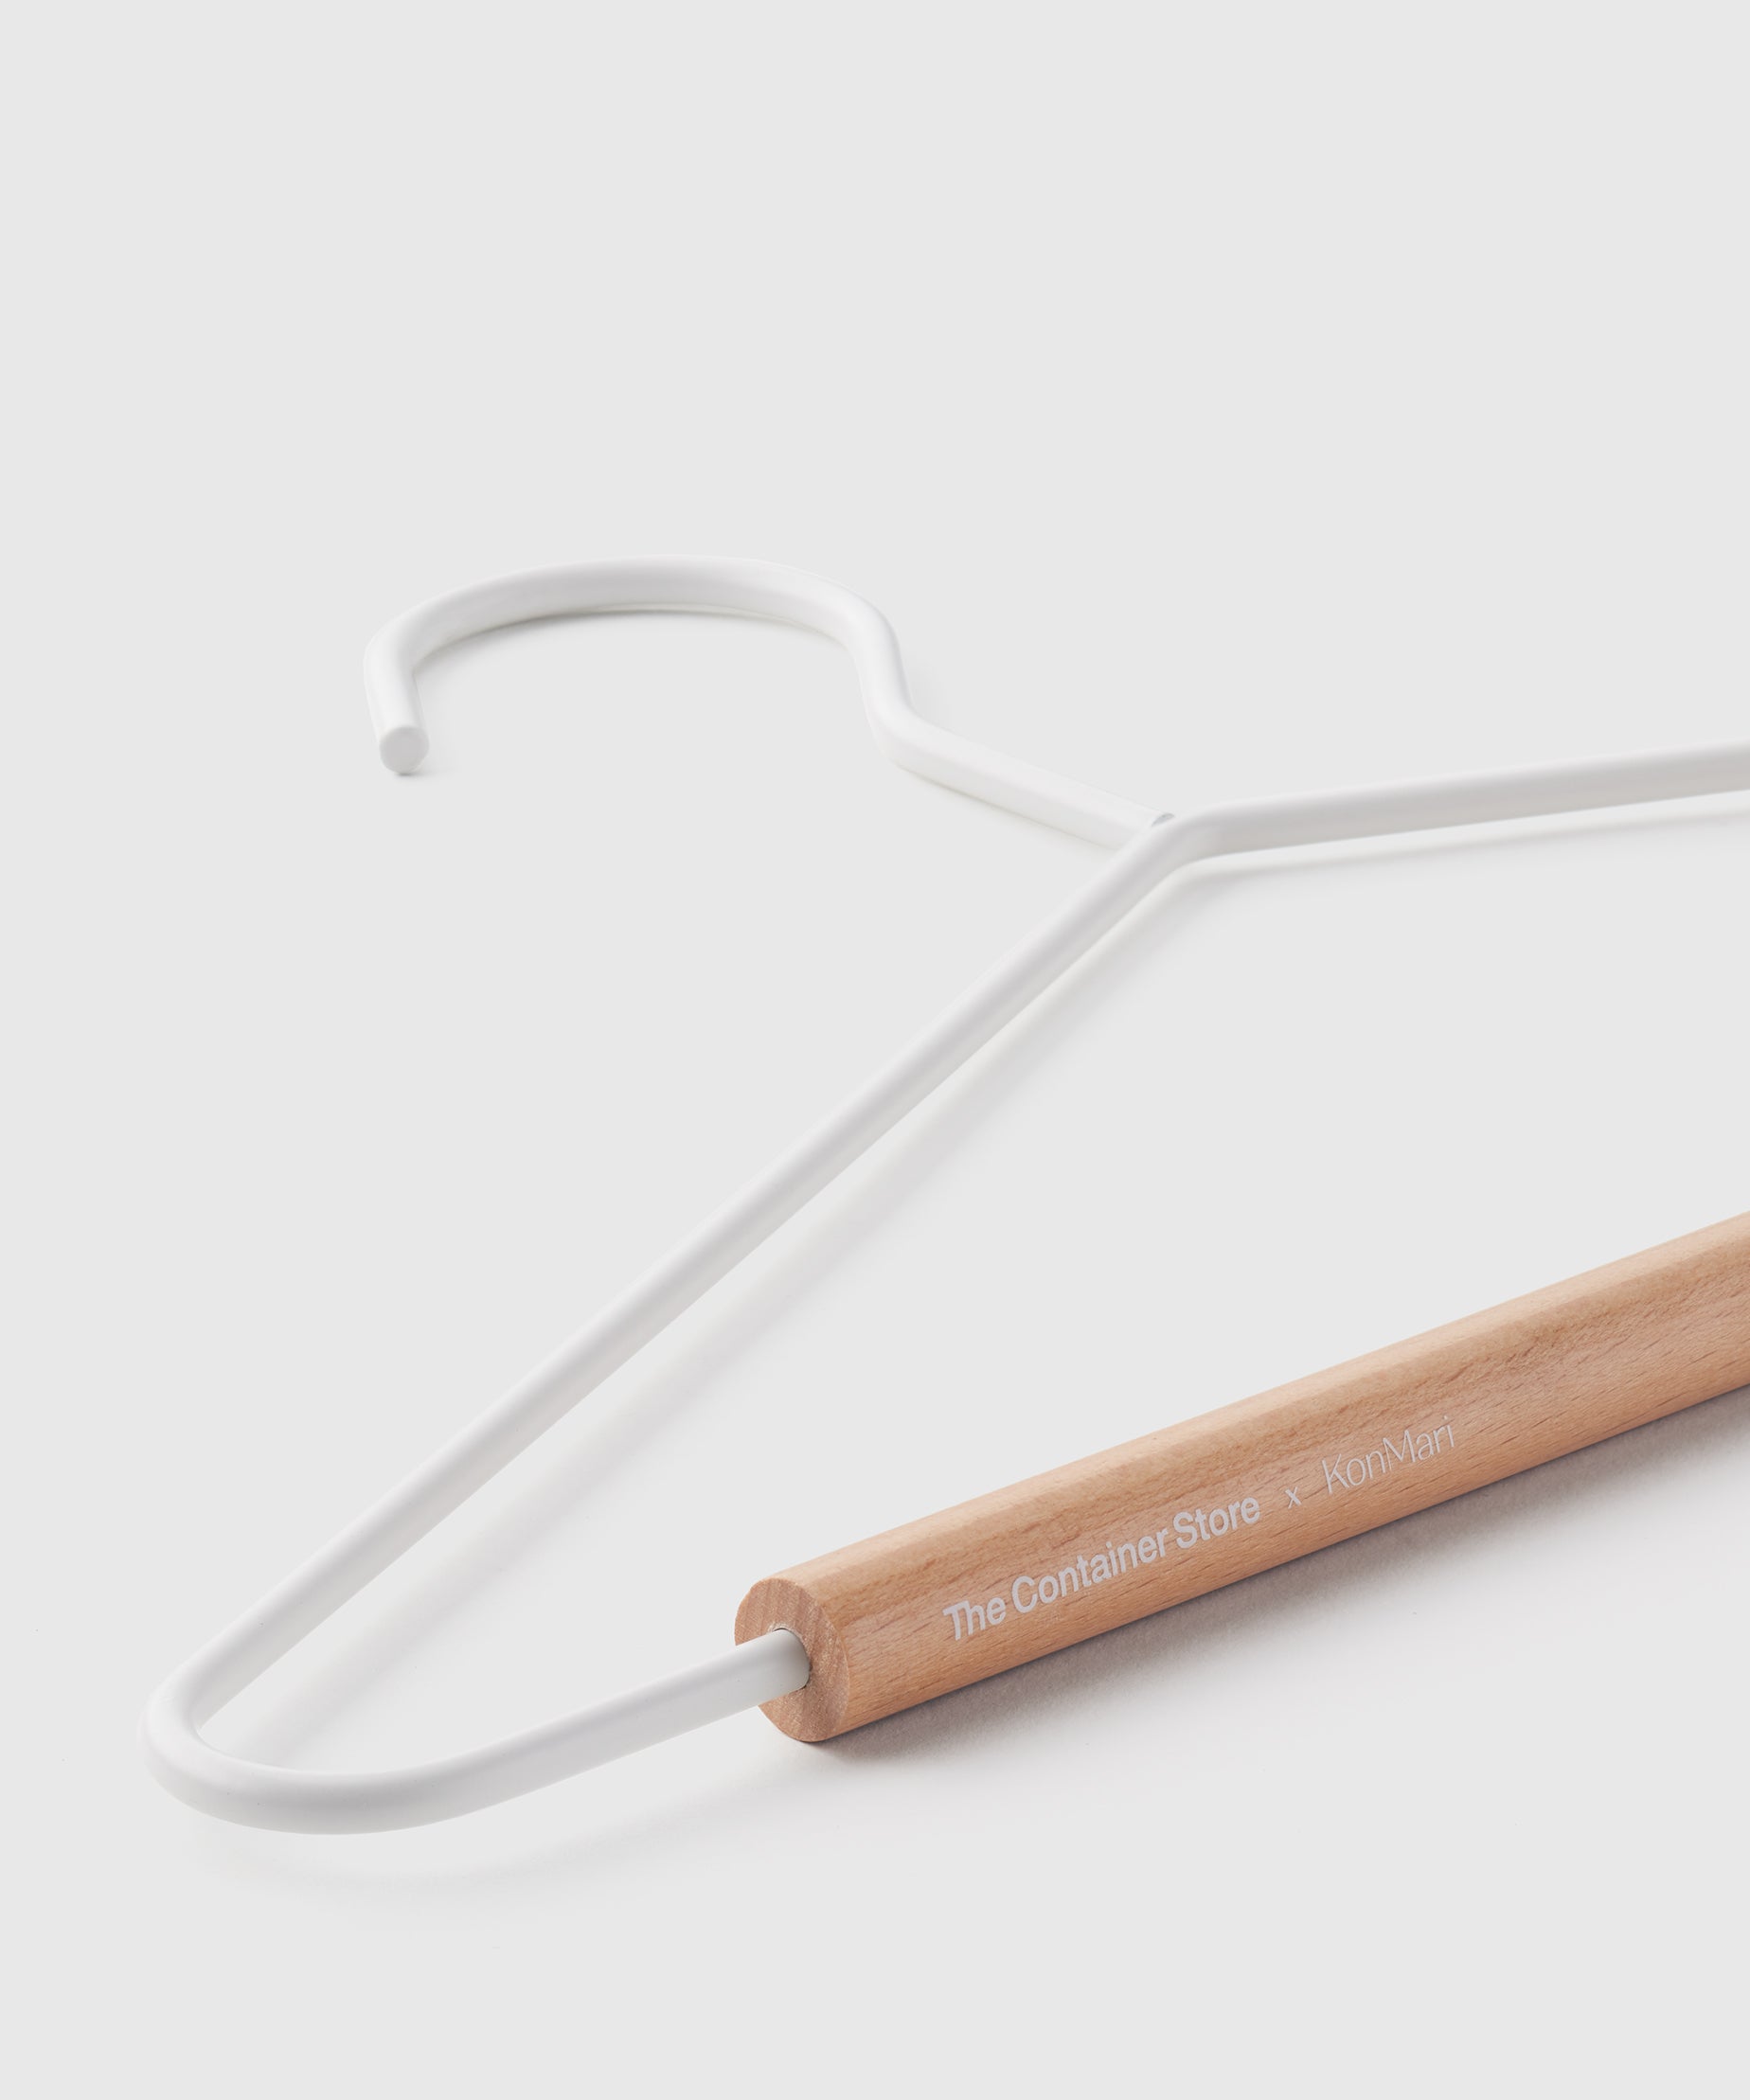 Matte White Metal Suit Hangers | The Container Store x KonMari